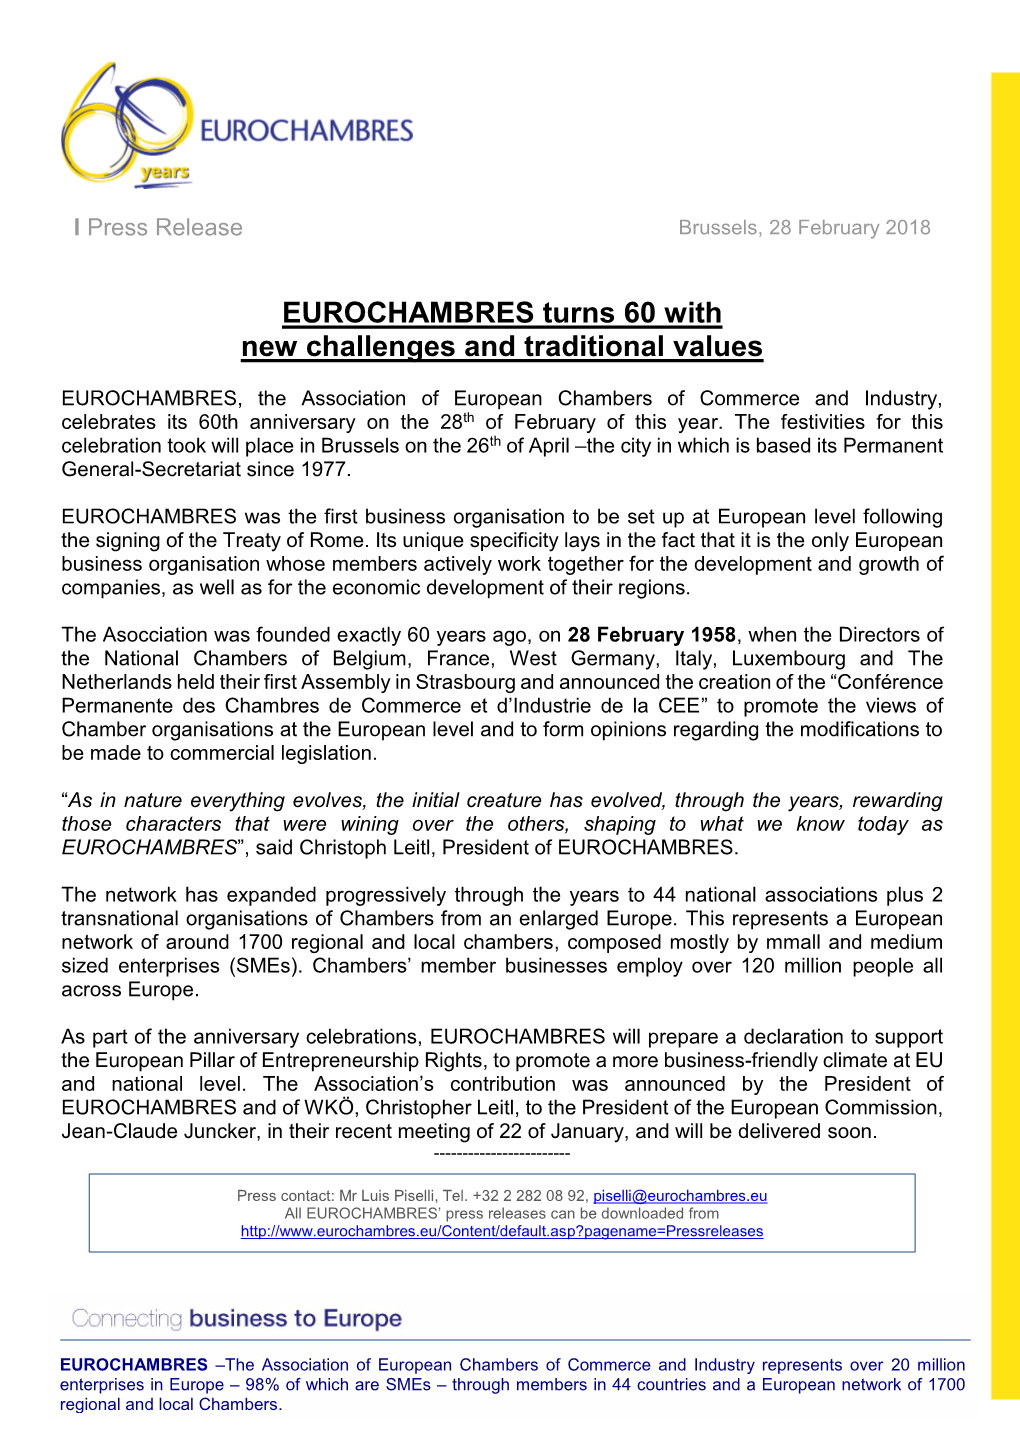 EUROCHAMBRES Turns 60 with New Challenges and Traditional Values